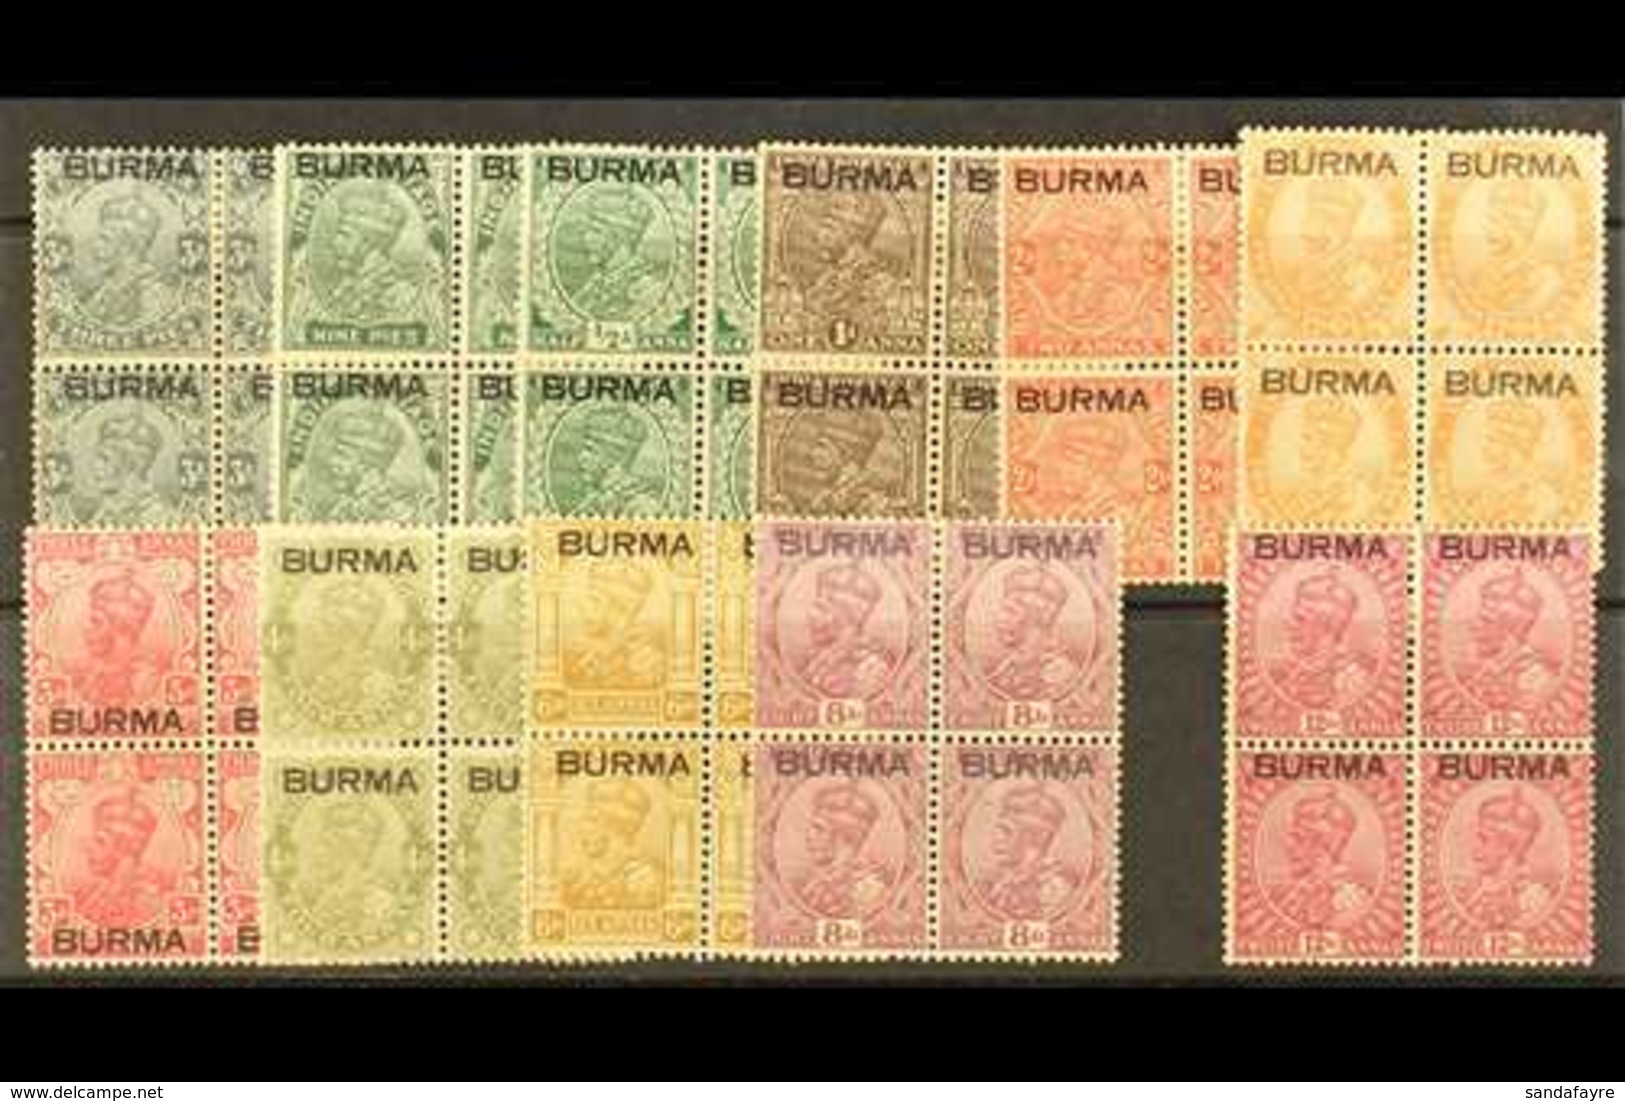 1937 MINT BLOCKS. A Fresh And Attractive Range Of King George V Values From 3p To 12a (missing Just The 3 1/2d Blue) As  - Burma (...-1947)